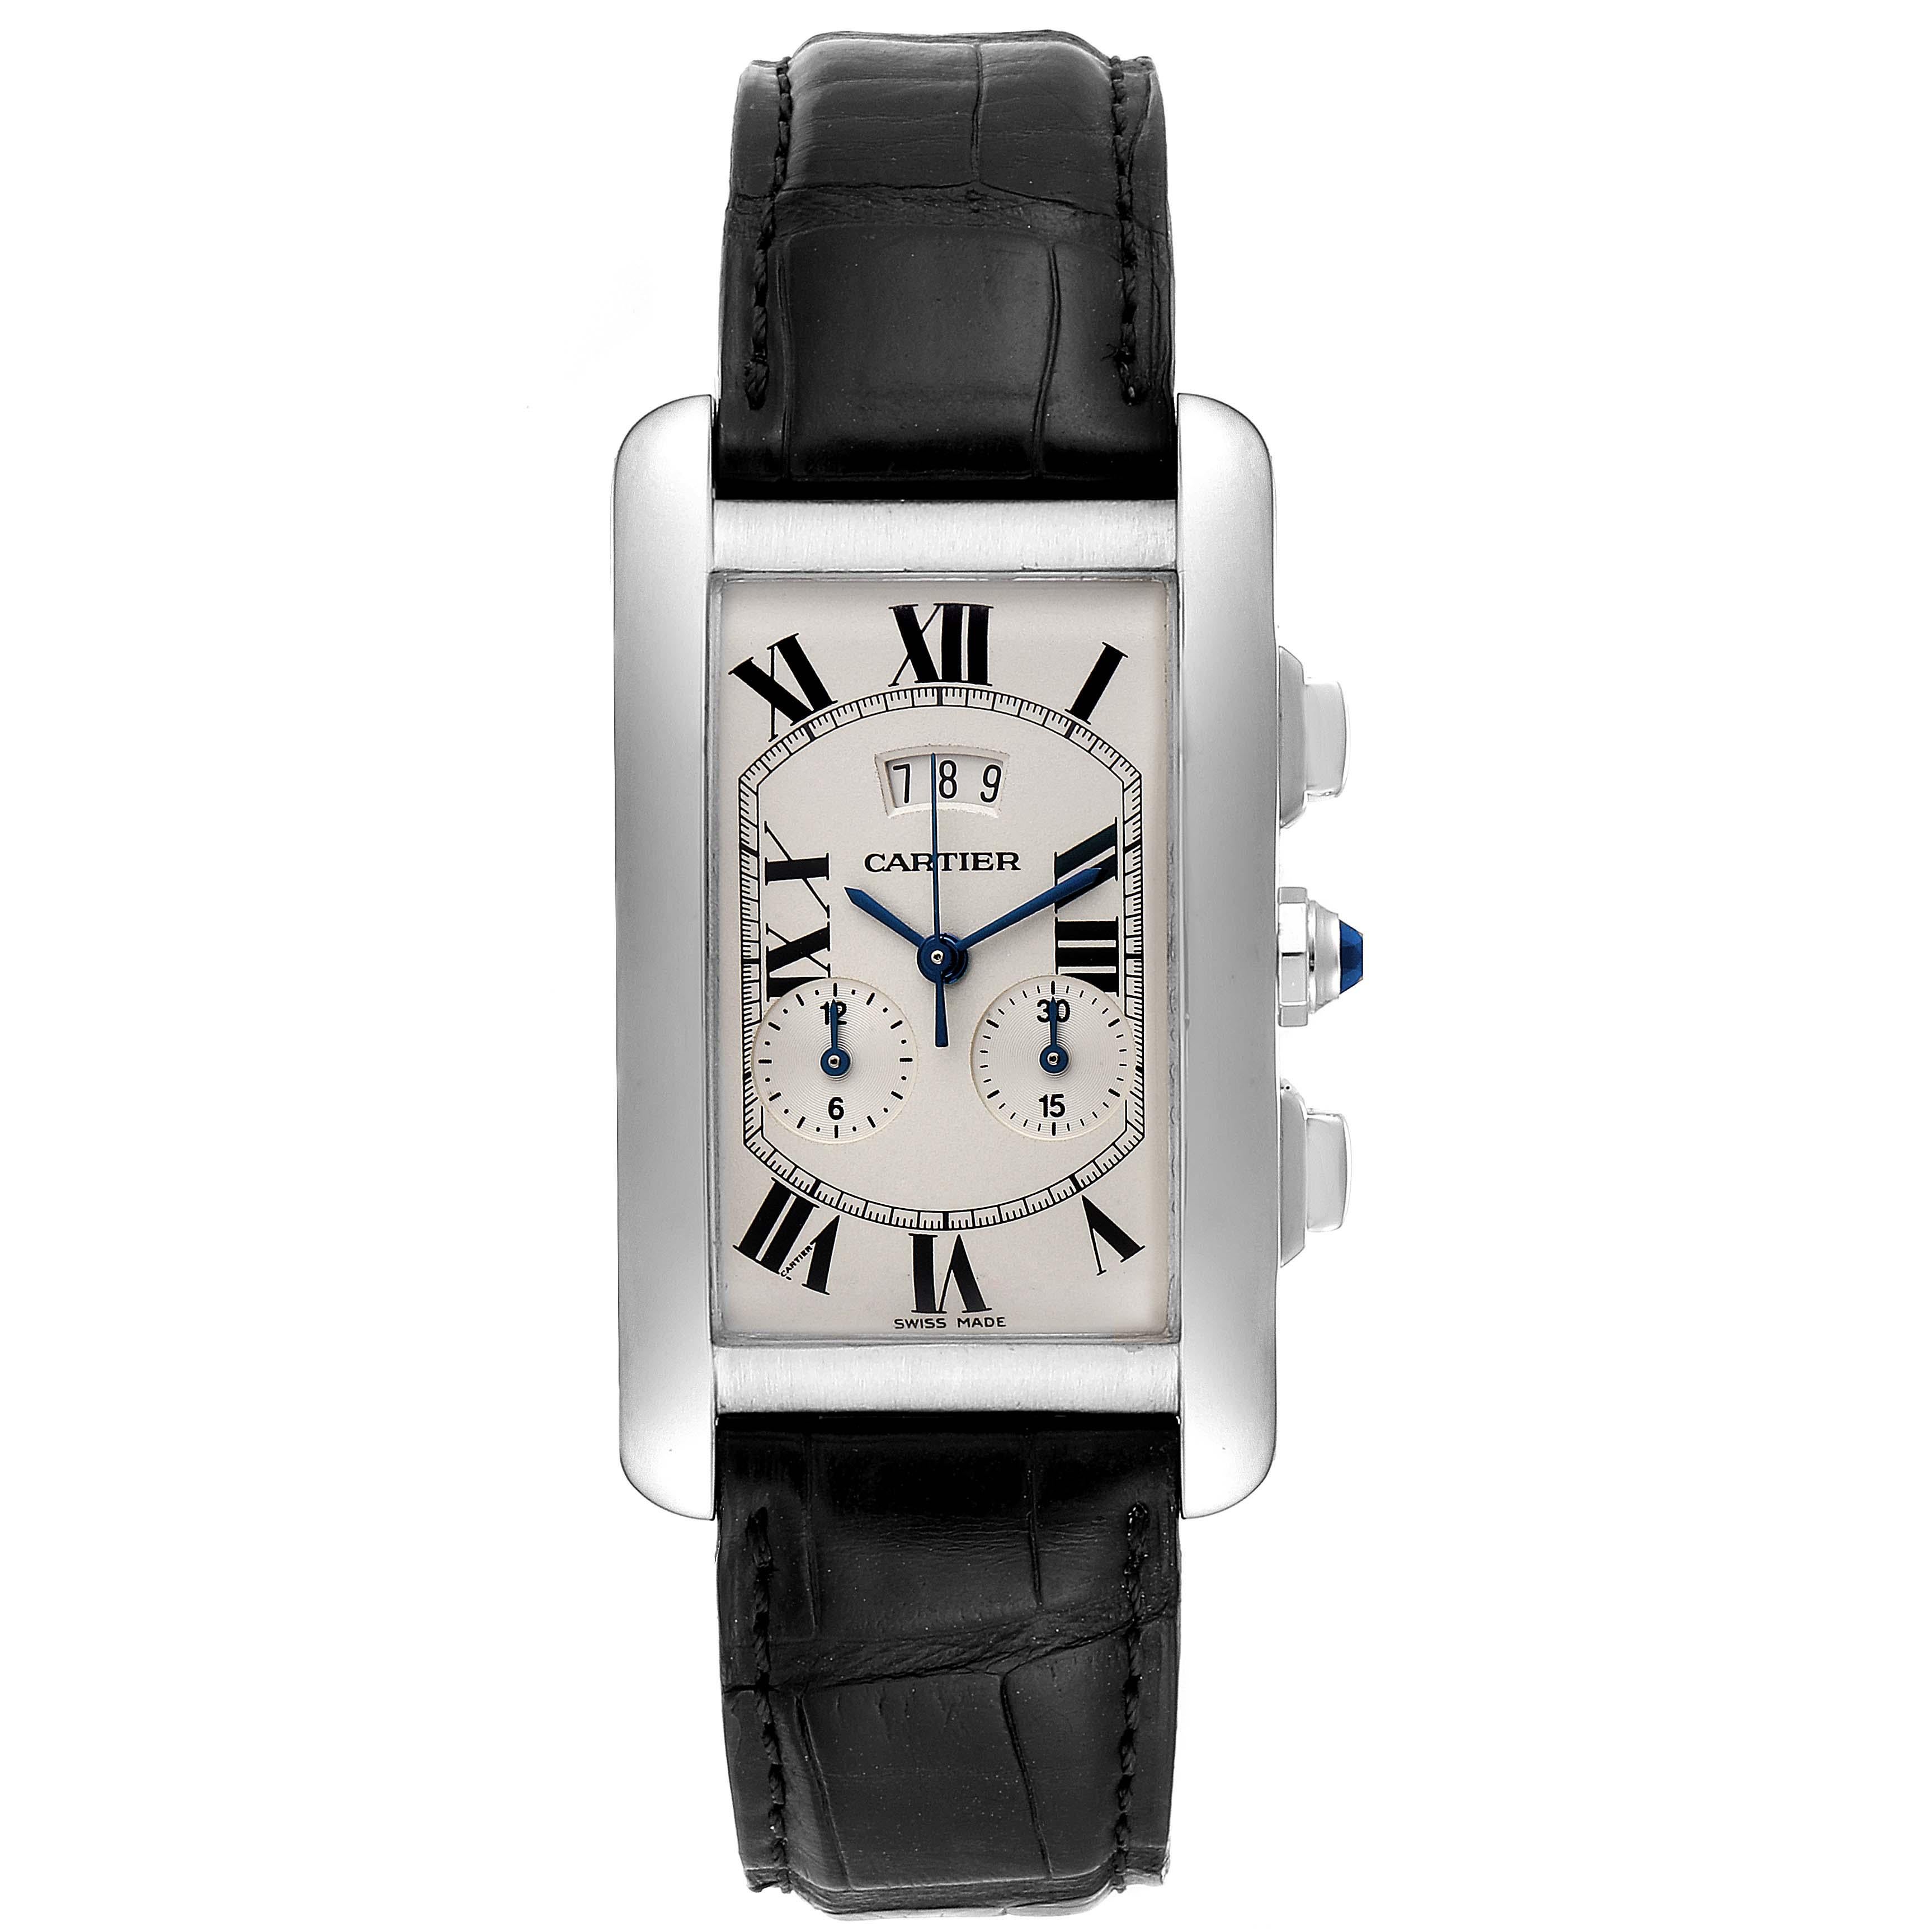 Cartier Tank Americaine White Gold Chronograph Mens Watch 2569. Quartz movement. 18K white gold case 26.6 x 45.1 mm. Circular grained crown set with faceted blue sapphire. . Scratch resistant sapphire crystal. Silvered grain dial with black roman